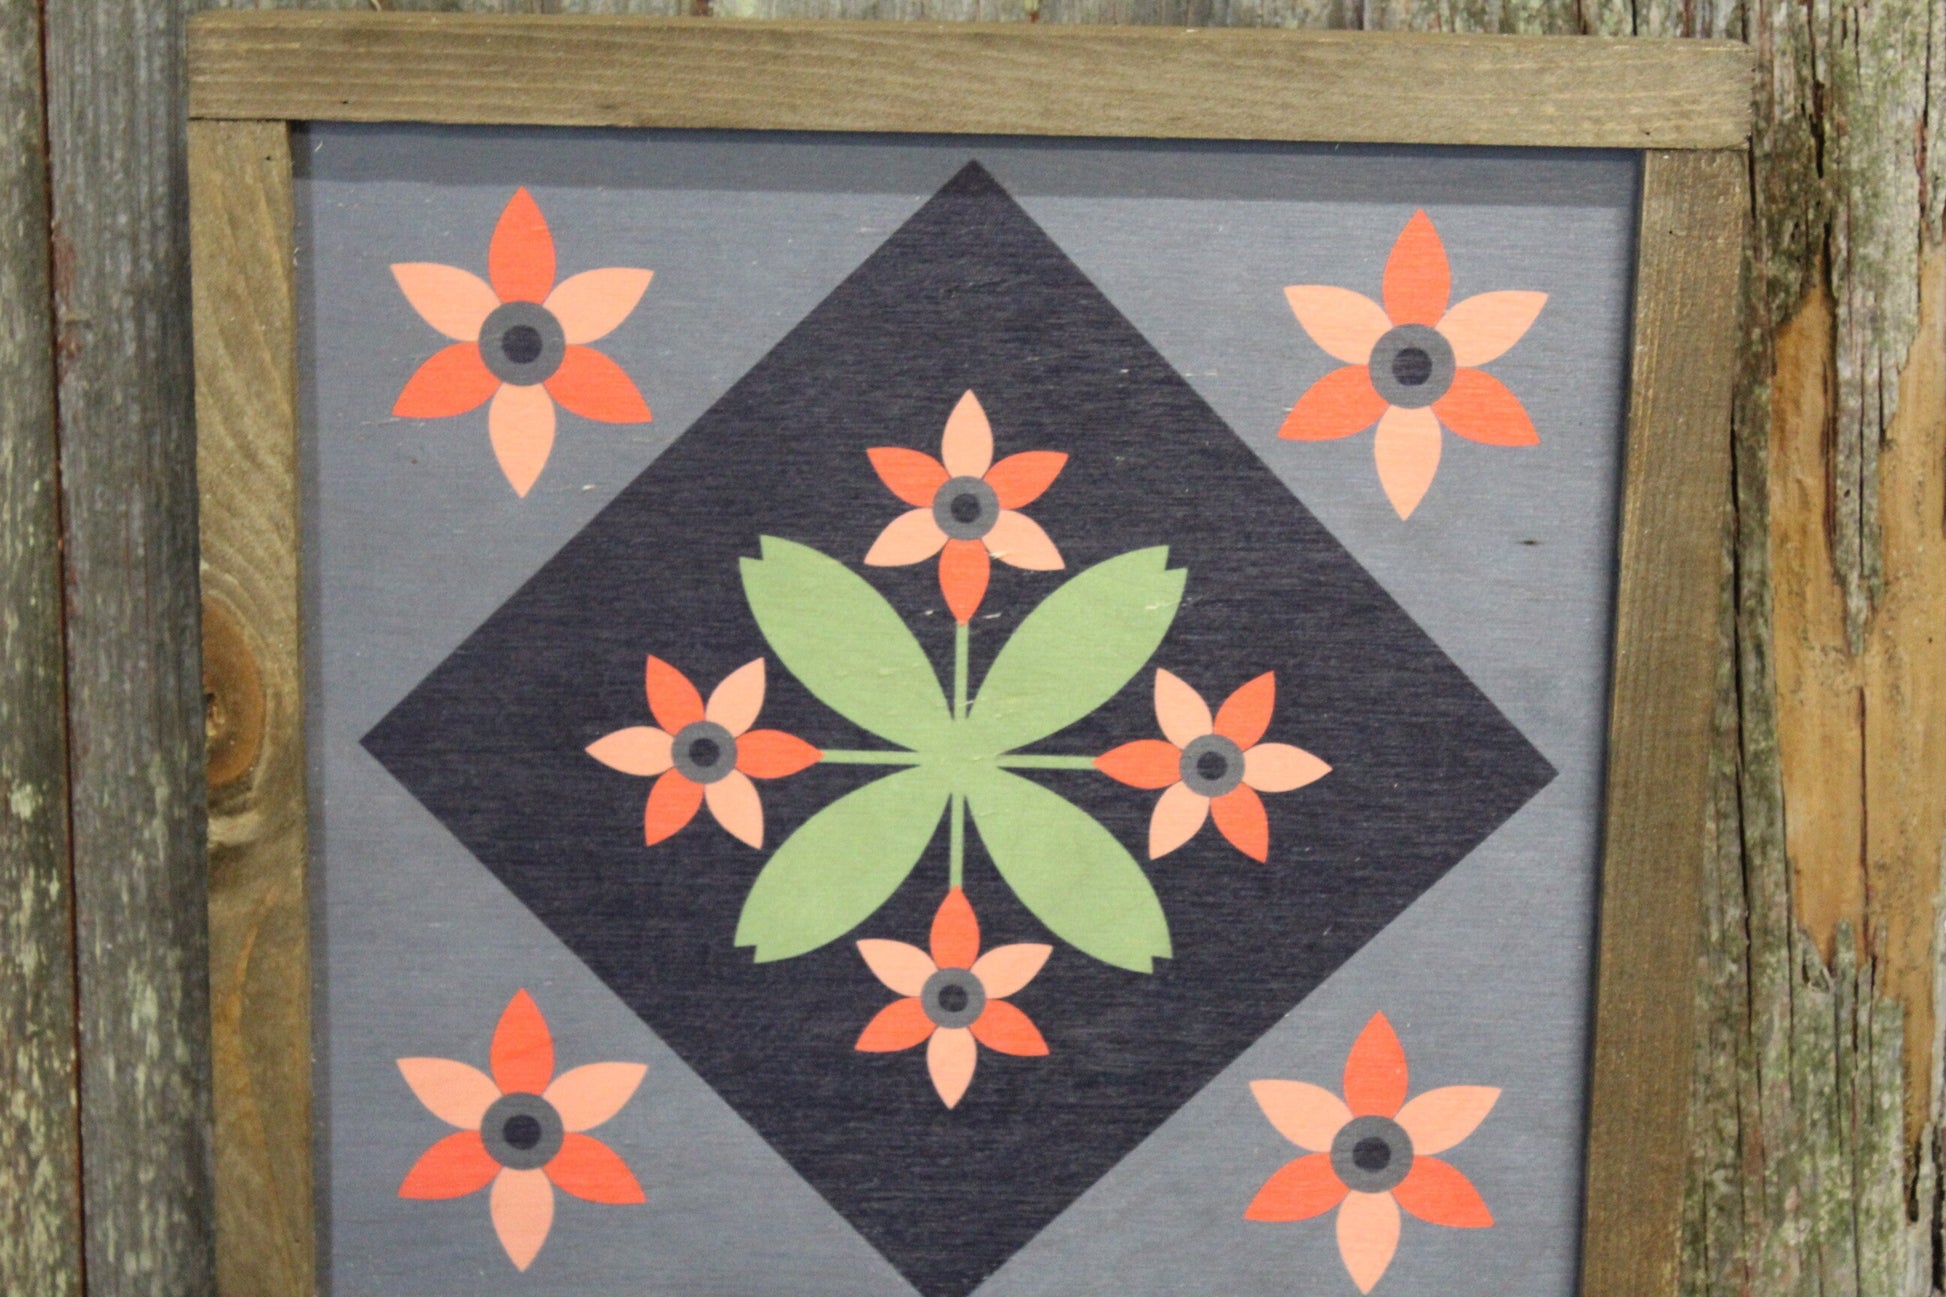 Flower Barn Quilt Wood Floral Bloom Diamond Sign Pastel Country Brown Framed Square Pattern Block Print Wall Art Farmhouse Primitive Rustic